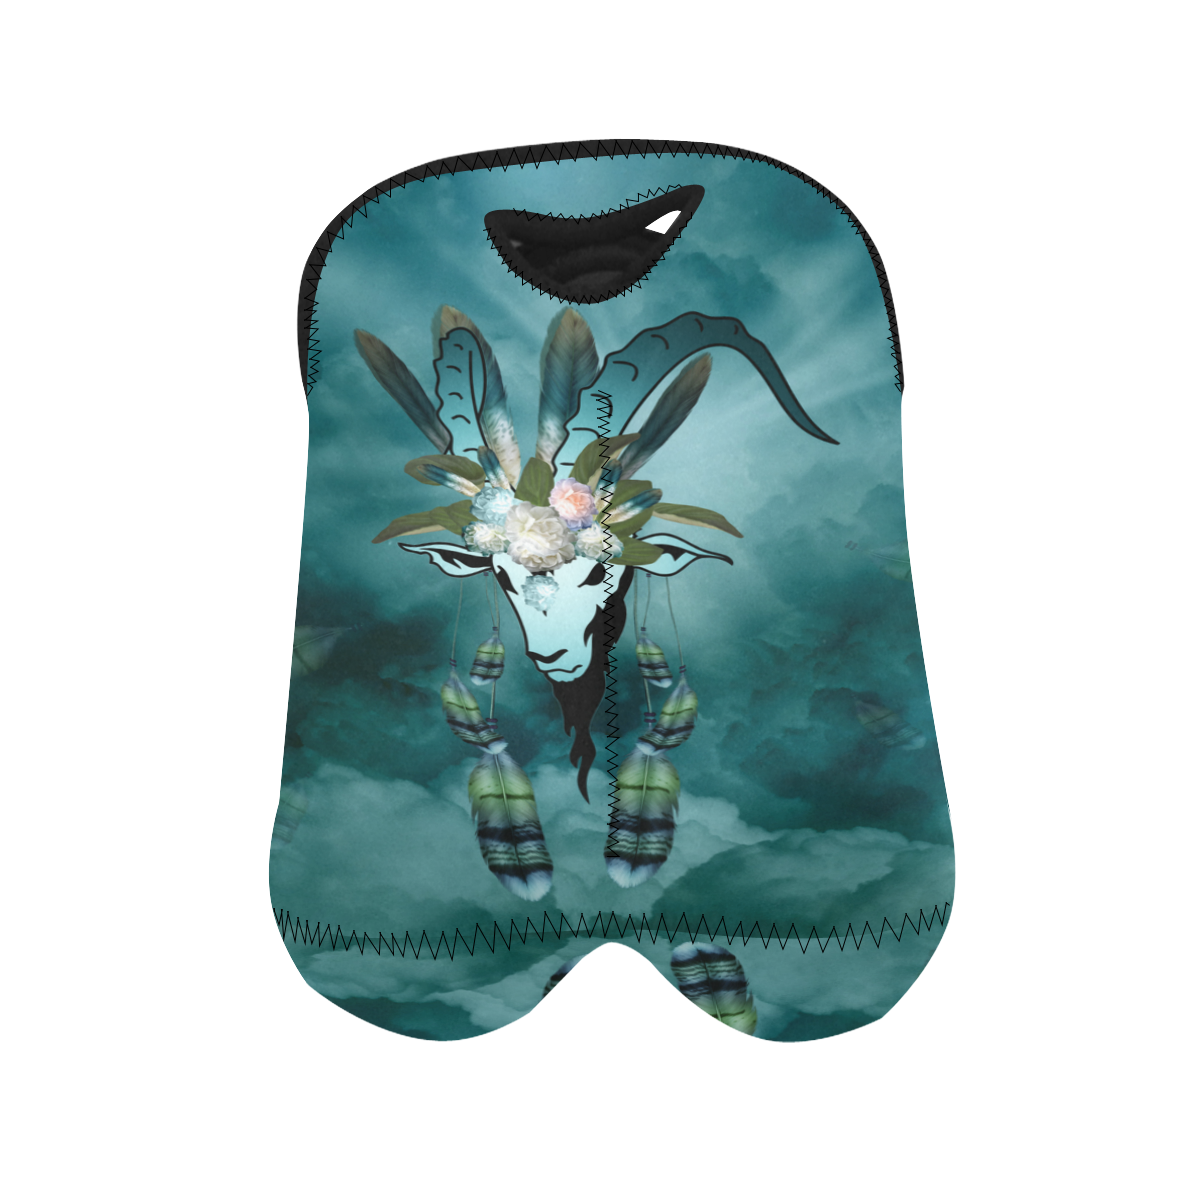 The billy goat with feathers and flowers 2-Bottle Neoprene Wine Bag